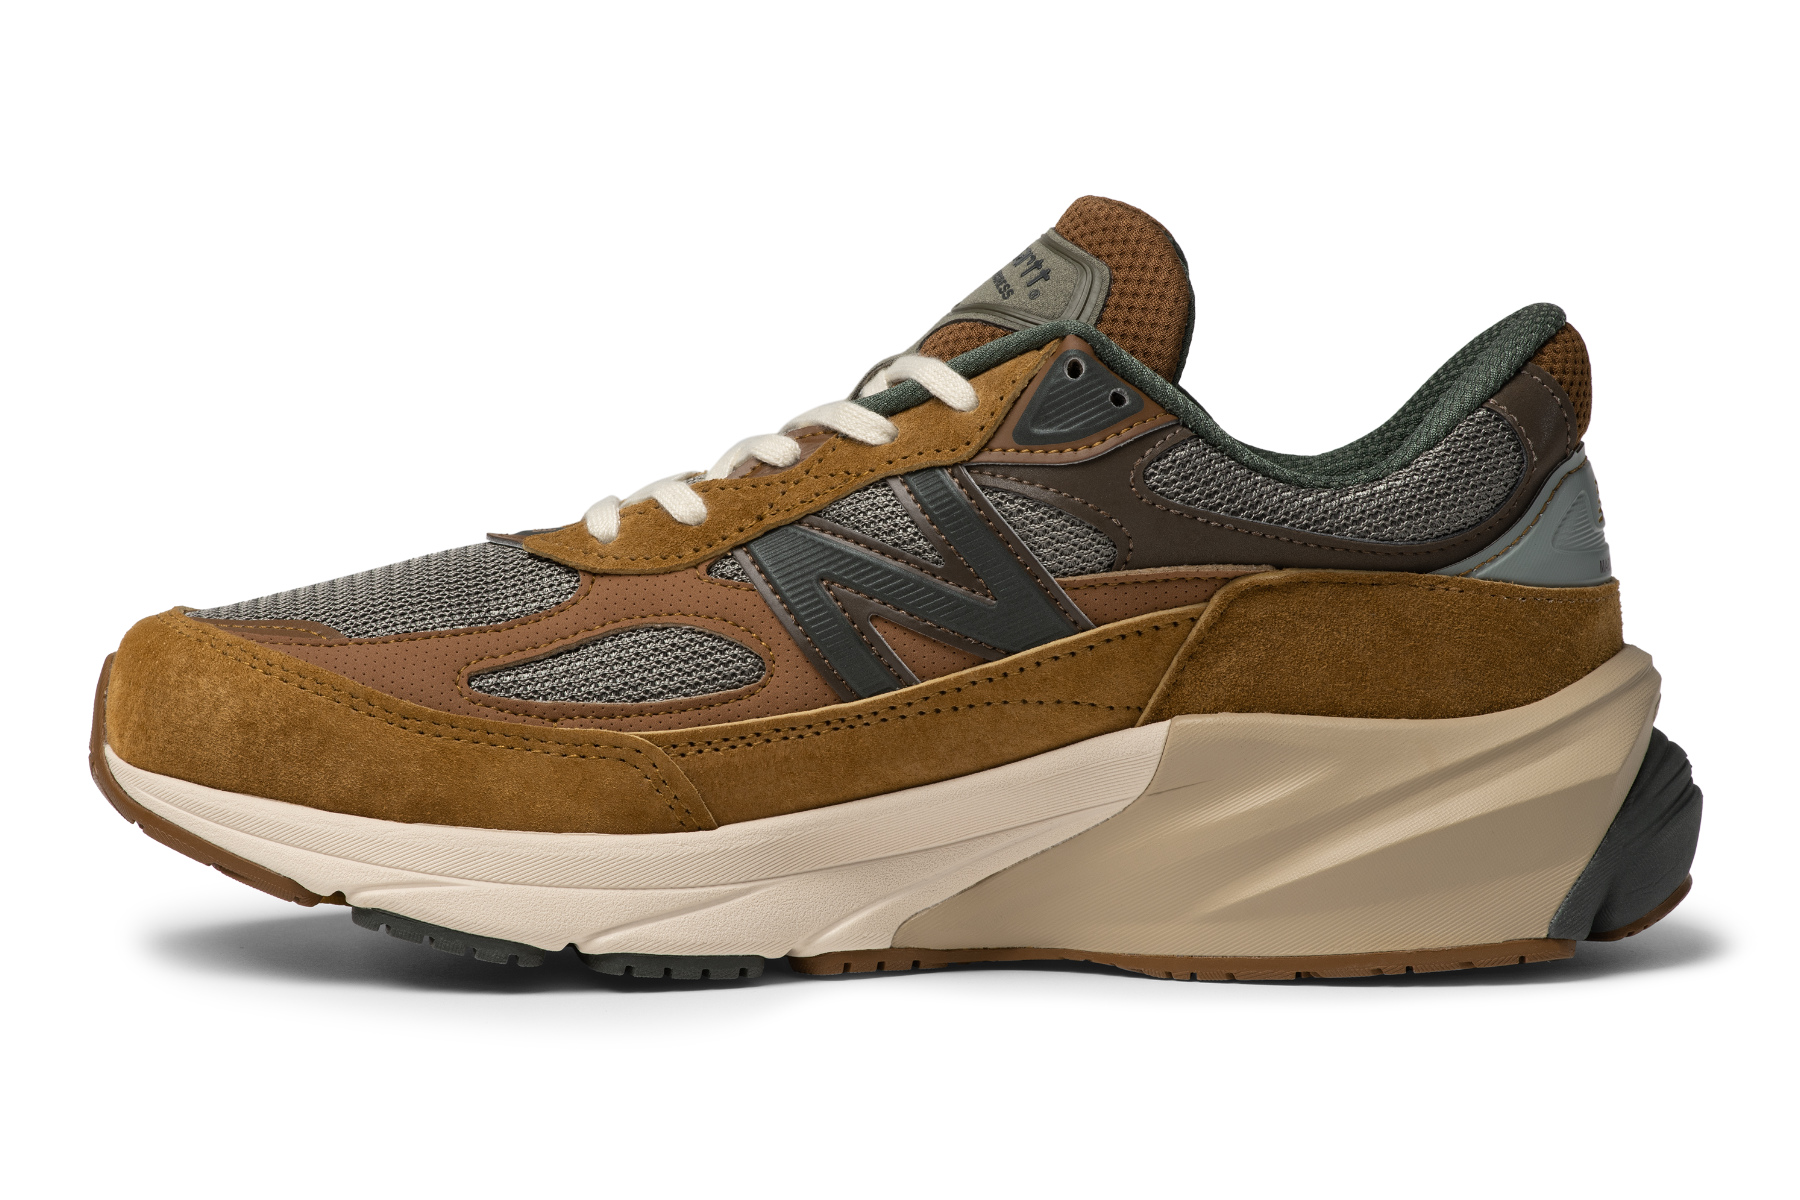 Carhartt WIP x New Balance 990v6 sneaker collaboration is dropping soon.